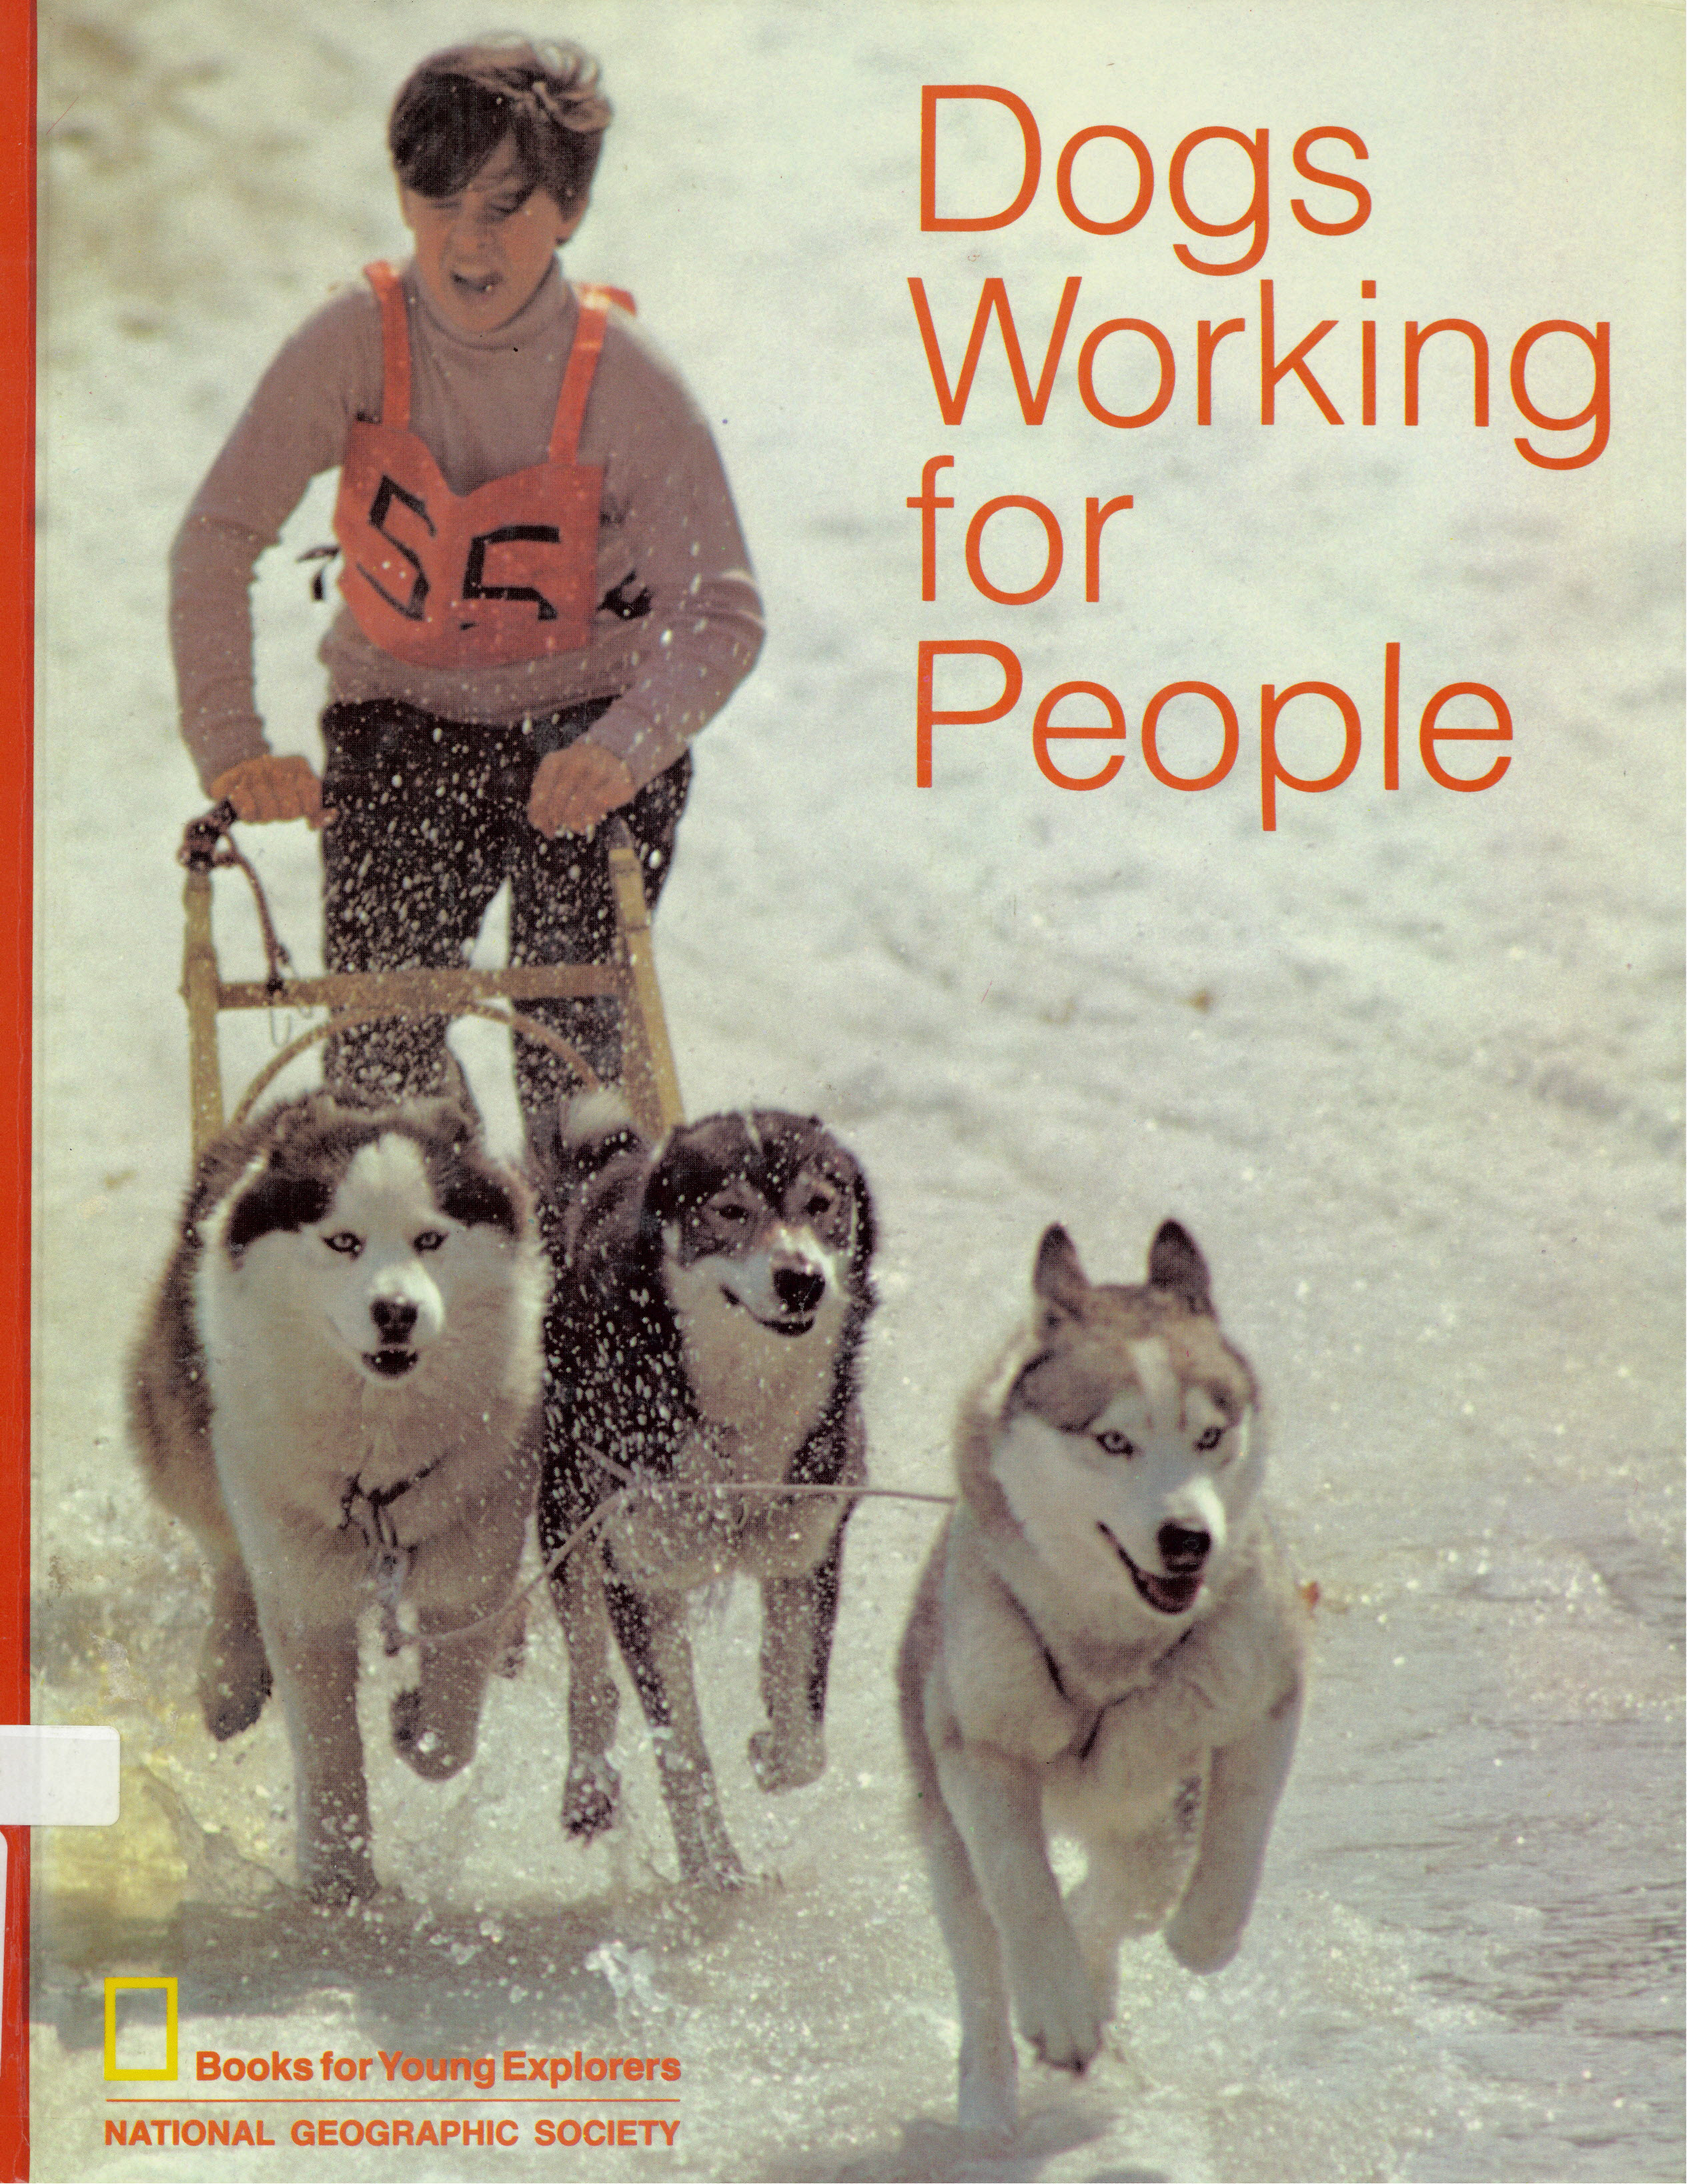 Dogs working for people